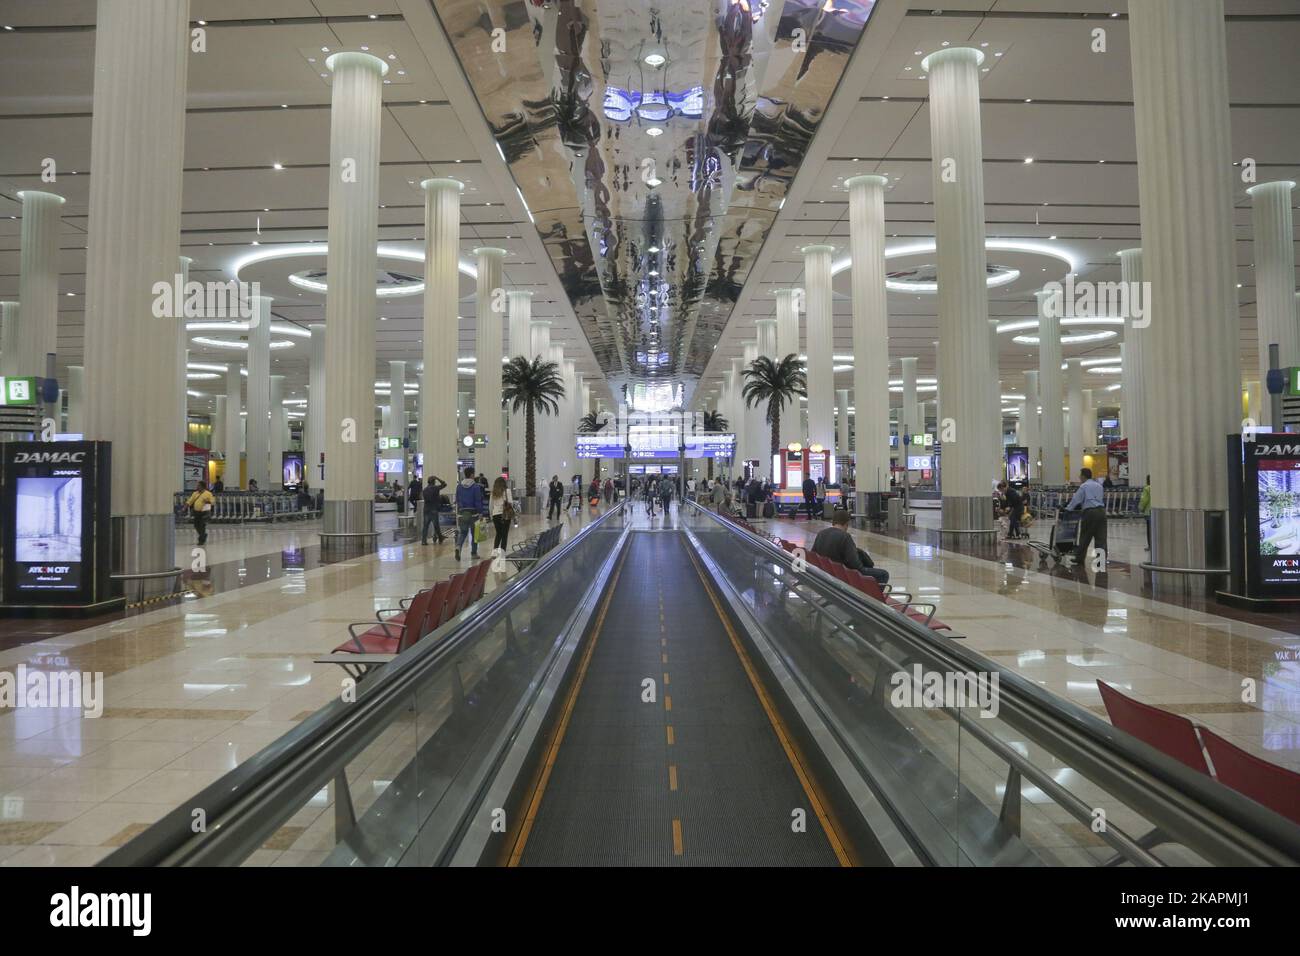 A picture taken on August 21, 2017 in the airport of Dunbai, UAE. Dubai International Airport, the largest airport in space in the world and busiest airport by international passenger traffic. It is also the 3rd busiest airport in the world by total passenger traffic. About 84.000.000 million passengers passed in 2016 from DXB. Emirates and Fludubai are the primary users of the airport, connecting Middle East to all over the world. Also FedEx Express and Qantas uses the airport as a hub. (Photo by Nicolas Economou/NurPhoto) Stock Photo